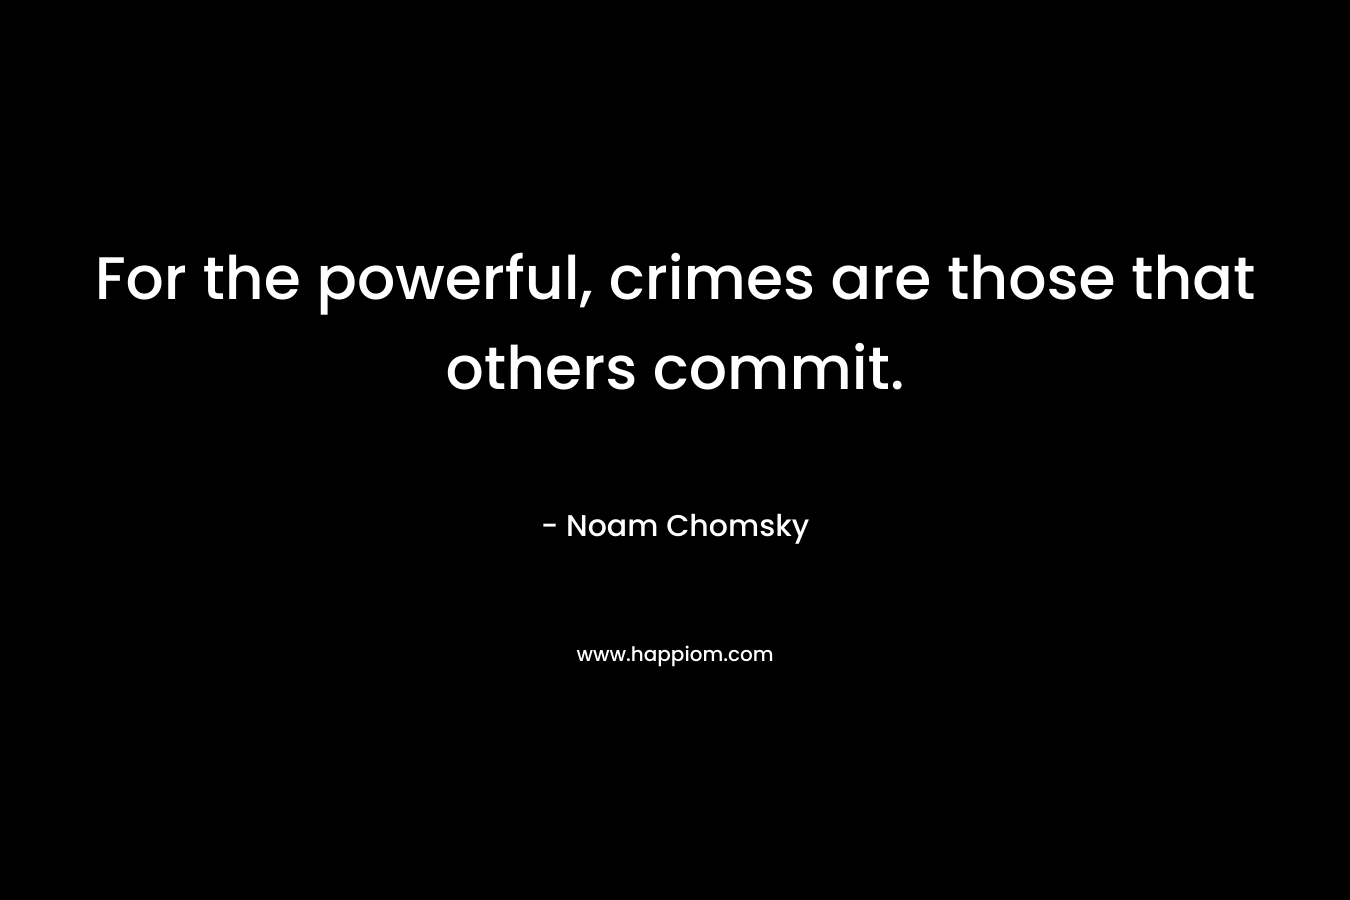 For the powerful, crimes are those that others commit.